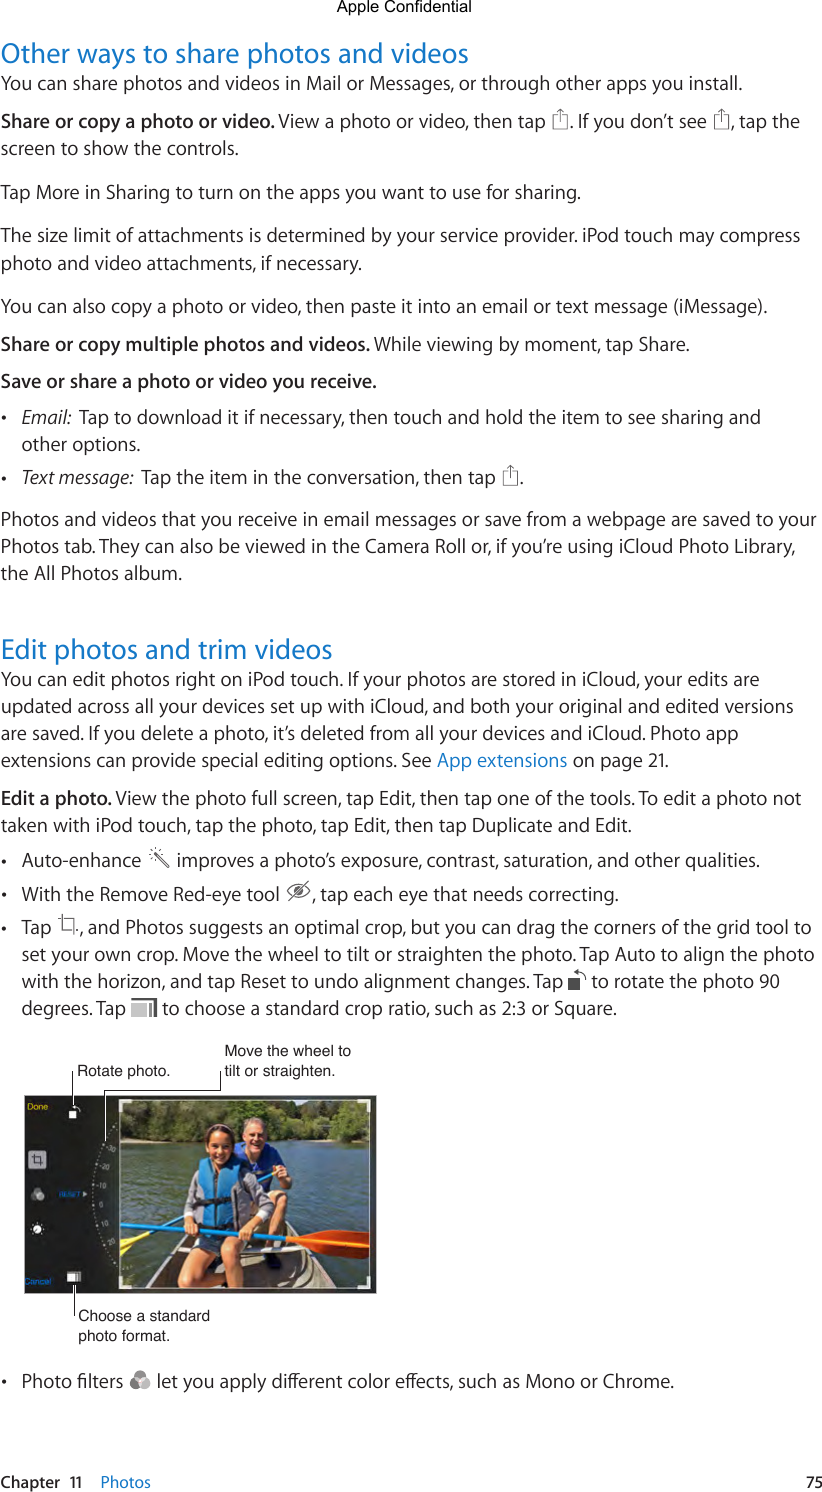 Chapter  11    Photos  75Other ways to share photos and videosYou can share photos and videos in Mail or Messages, or through other apps you install. Share or copy a photo or video. View a photo or video, then tap  . If you don’t see  , tap the screen to show the controls.Tap More in Sharing to turn on the apps you want to use for sharing. The size limit of attachments is determined by your service provider. iPod touch may compress photo and video attachments, if necessary.You can also copy a photo or video, then paste it into an email or text message (iMessage).Share or copy multiple photos and videos. While viewing by moment, tap Share. Save or share a photo or video you receive.  •Email:  Tap to download it if necessary, then touch and hold the item to see sharing andother options. •Text message:  Tap the item in the conversation, then tap  .Photos and videos that you receive in email messages or save from a webpage are saved to your Photos tab. They can also be viewed in the Camera Roll or, if you’re using iCloud Photo Library, the All Photos album.Edit photos and trim videosYou can edit photos right on iPod touch. If your photos are stored in iCloud, your edits are updated across all your devices set up with iCloud, and both your original and edited versions are saved. If you delete a photo, it’s deleted from all your devices and iCloud. Photo app extensions can provide special editing options. See App extensions on page 21.Edit a photo. View the photo full screen, tap Edit, then tap one of the tools. To edit a photo not taken with iPod touch, tap the photo, tap Edit, then tap Duplicate and Edit.  •Auto-enhance   improves a photo’s exposure, contrast, saturation, and other qualities. •With the Remove Red-eye tool  , tap each eye that needs correcting. •Tap  , and Photos suggests an optimal crop, but you can drag the corners of the grid tool toset your own crop. Move the wheel to tilt or straighten the photo. Tap Auto to align the photowith the horizon, and tap Reset to undo alignment changes. Tap   to rotate the photo 90degrees. Tap   to choose a standard crop ratio, such as 2:3 or Square.Rotate photo. Rotate photo. Move the wheel to tilt or straighten. Move the wheel to tilt or straighten. Choose a standard photo format.Choose a standard photo format. •Photolters letyouapplydierentcoloreects,suchasMonoorChrome.Apple Confidential